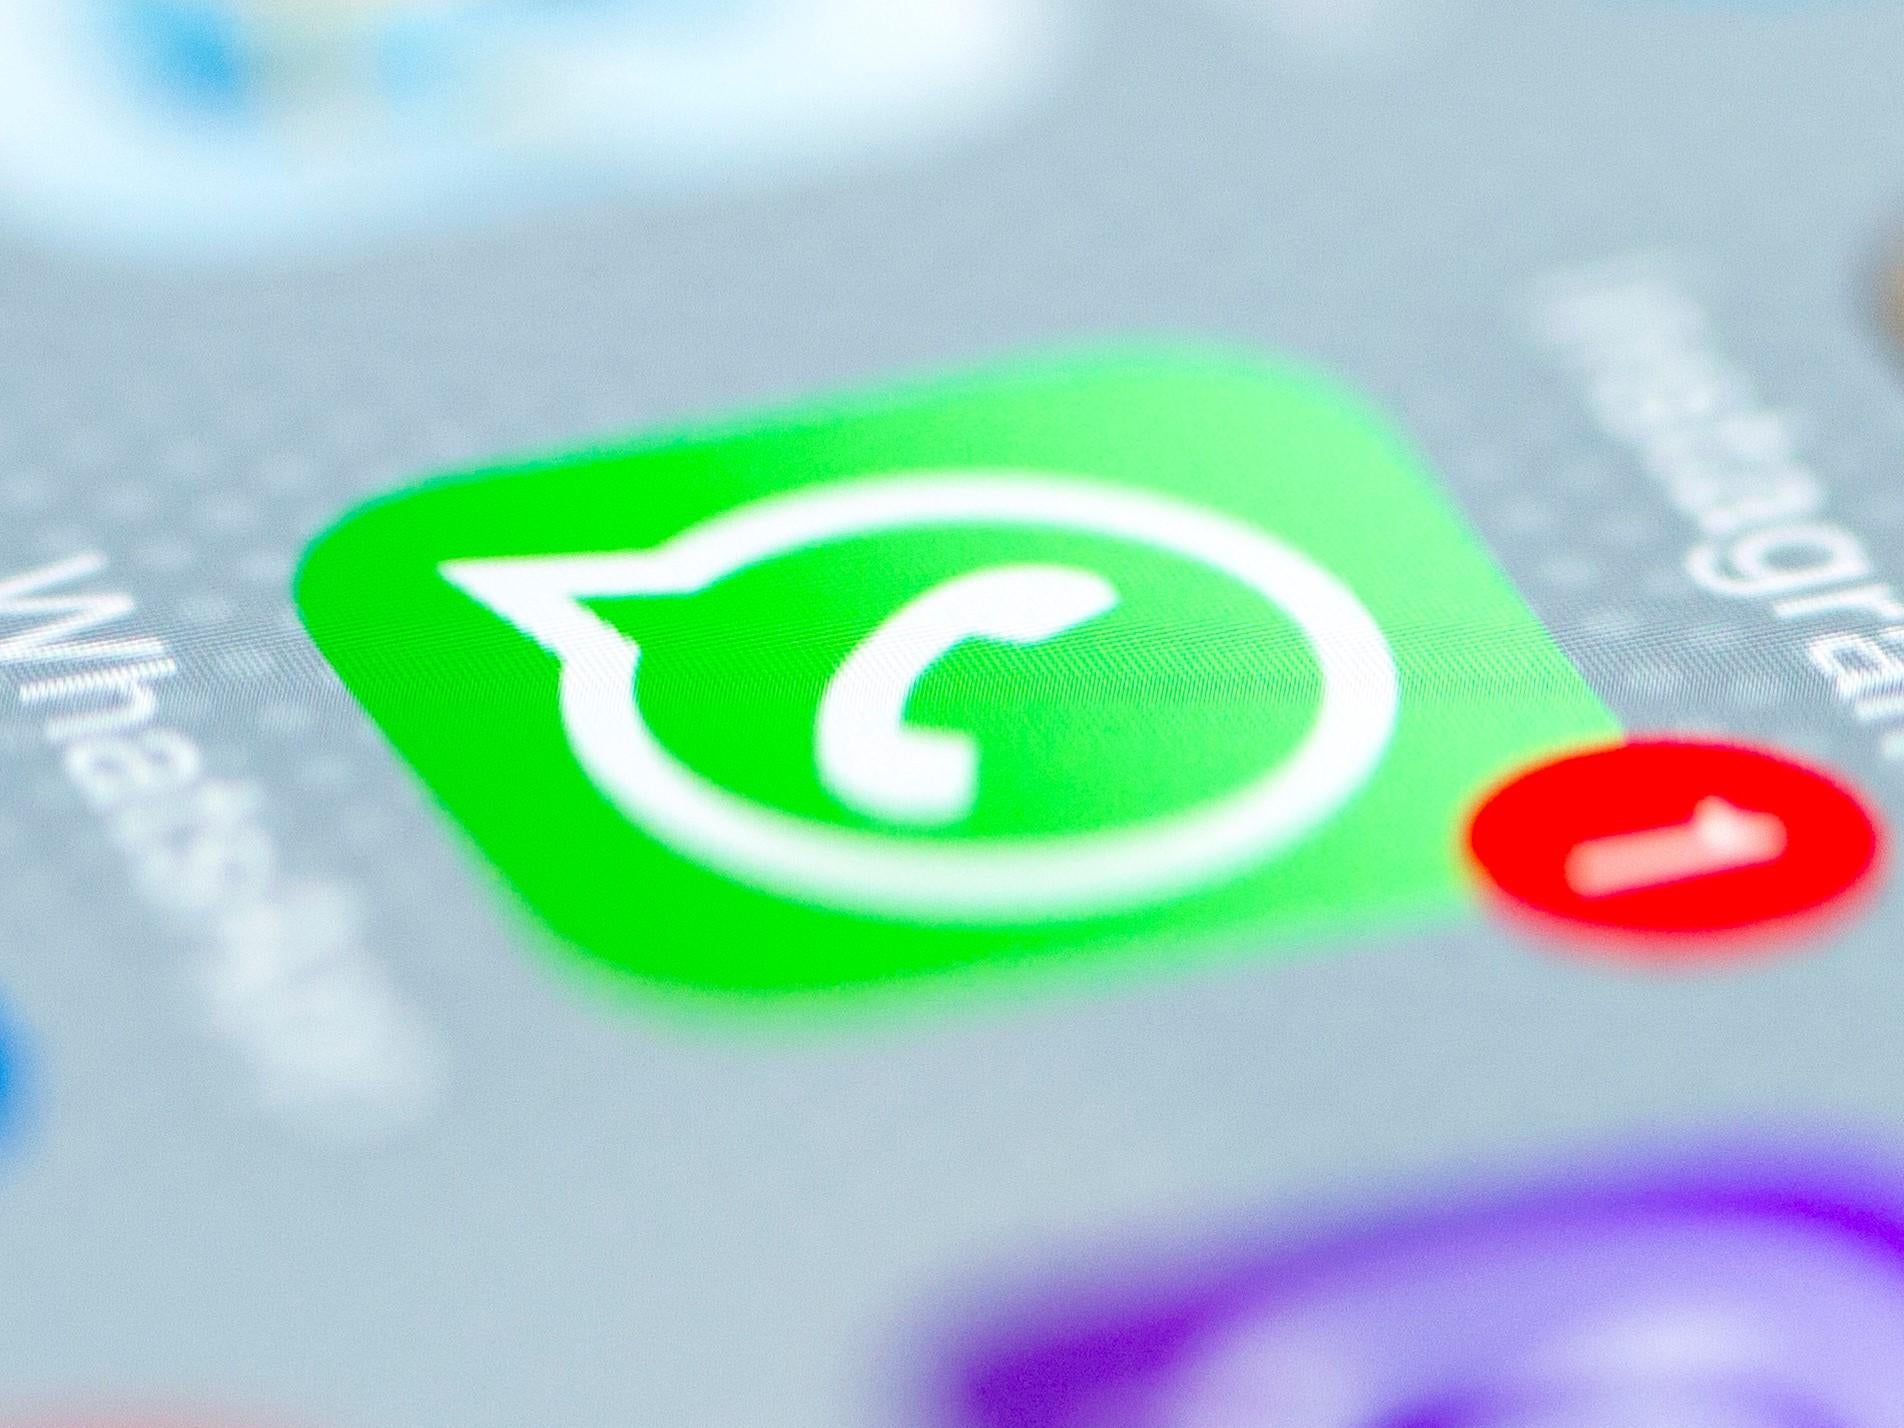 In a group conversation Whatsapp users can change the identity of a sender